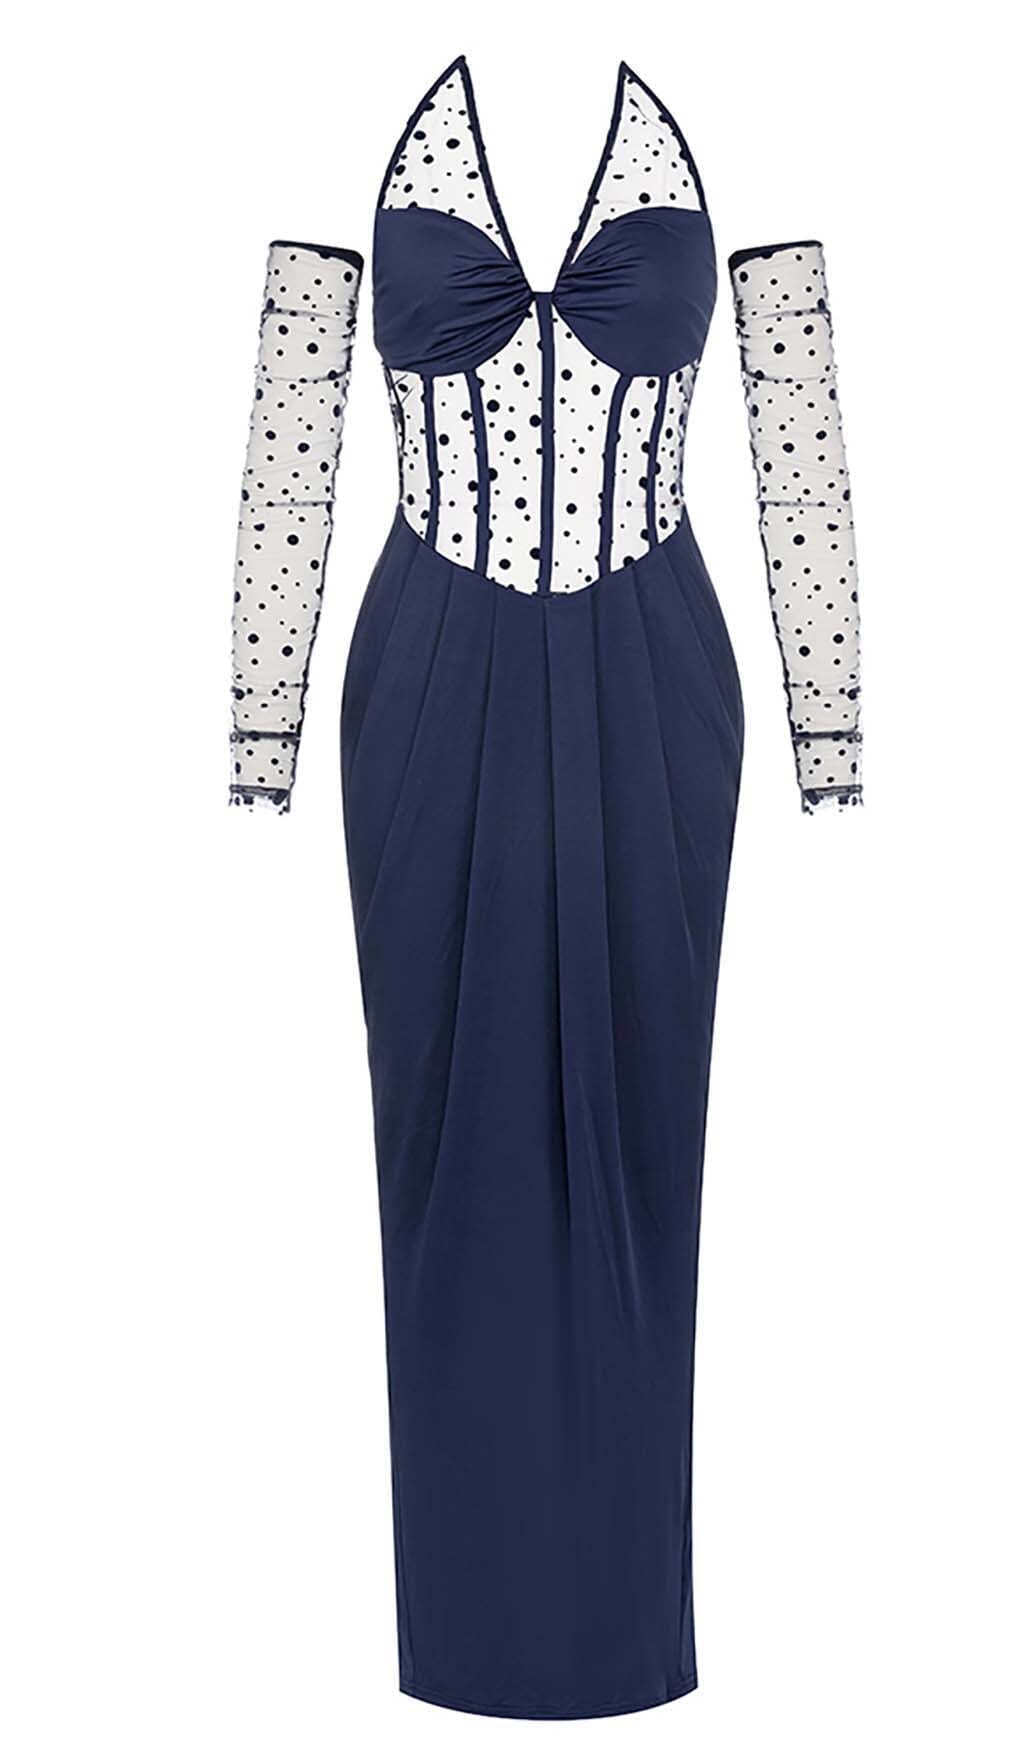 CORSET LACE MAXI DRESS IN NAVY BLUE